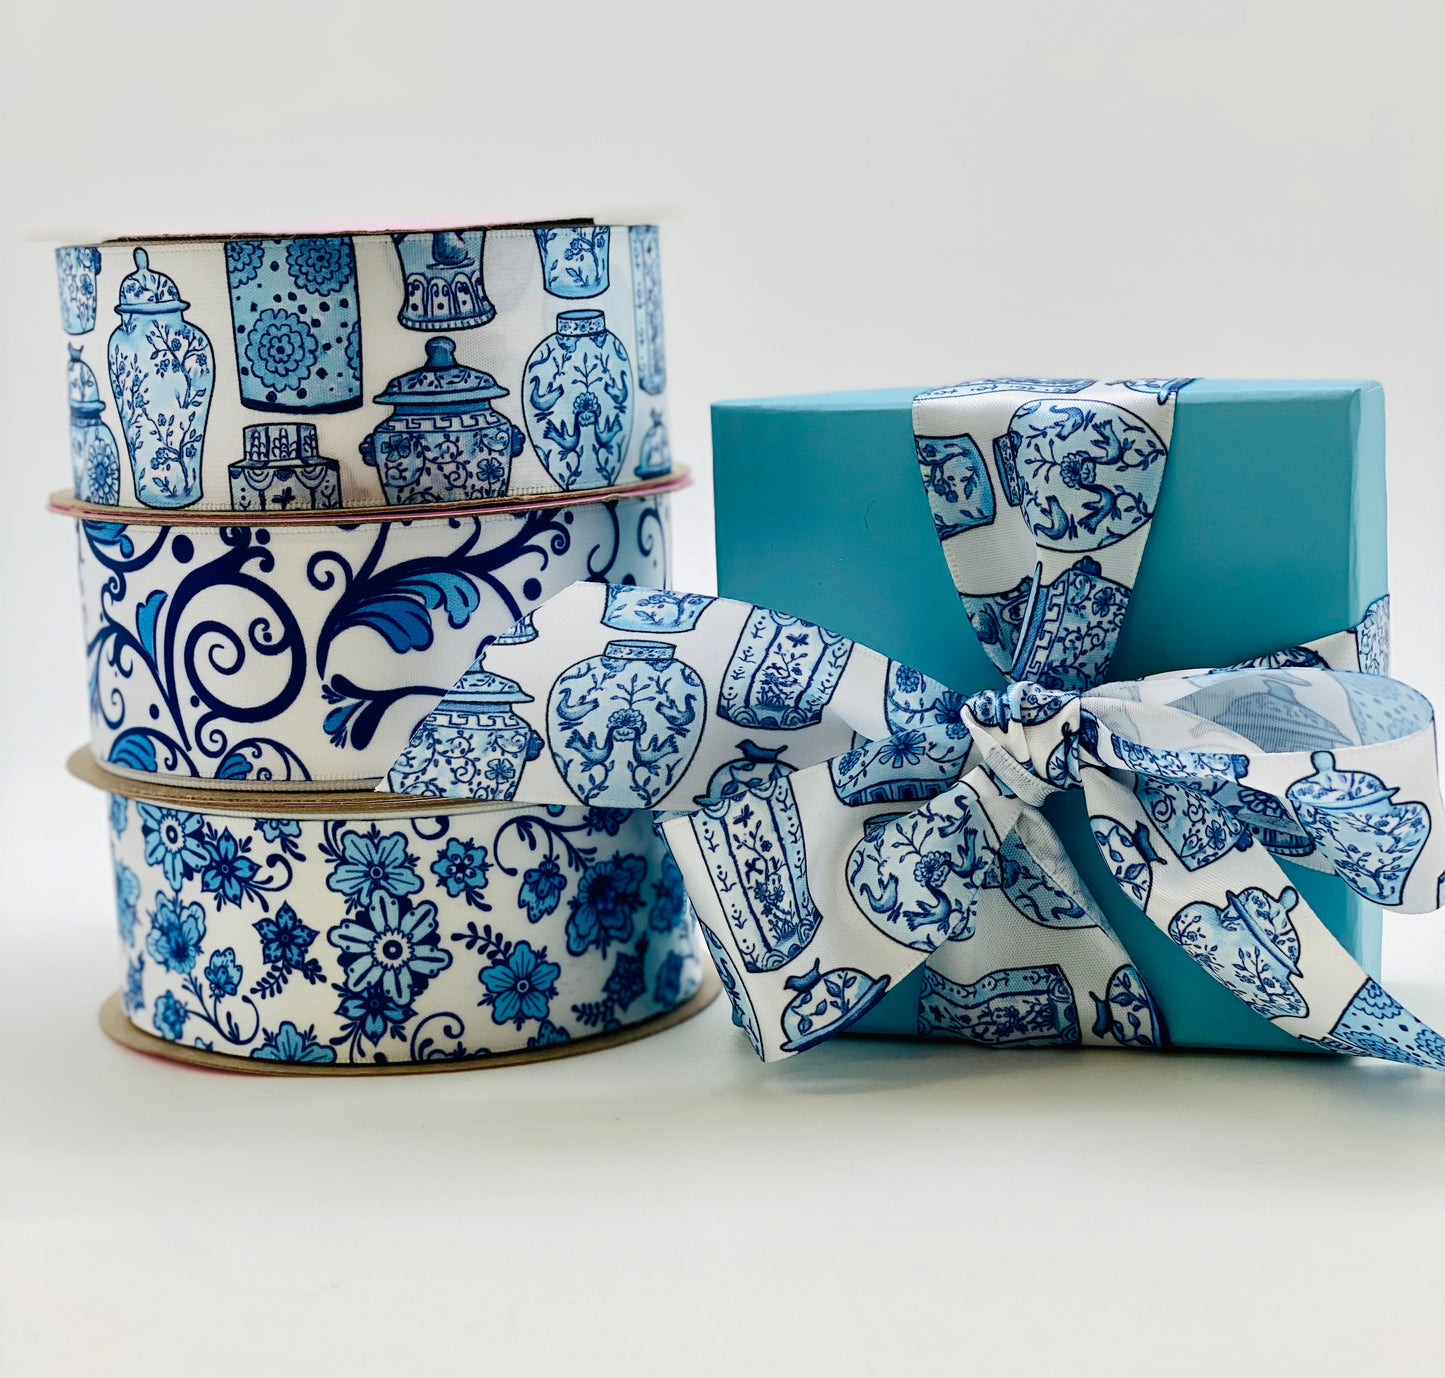 Ginger Jar ribbon in blue and white Chinoiserie style designs printed on 7/8" and 1.5" white single face satin ribbon